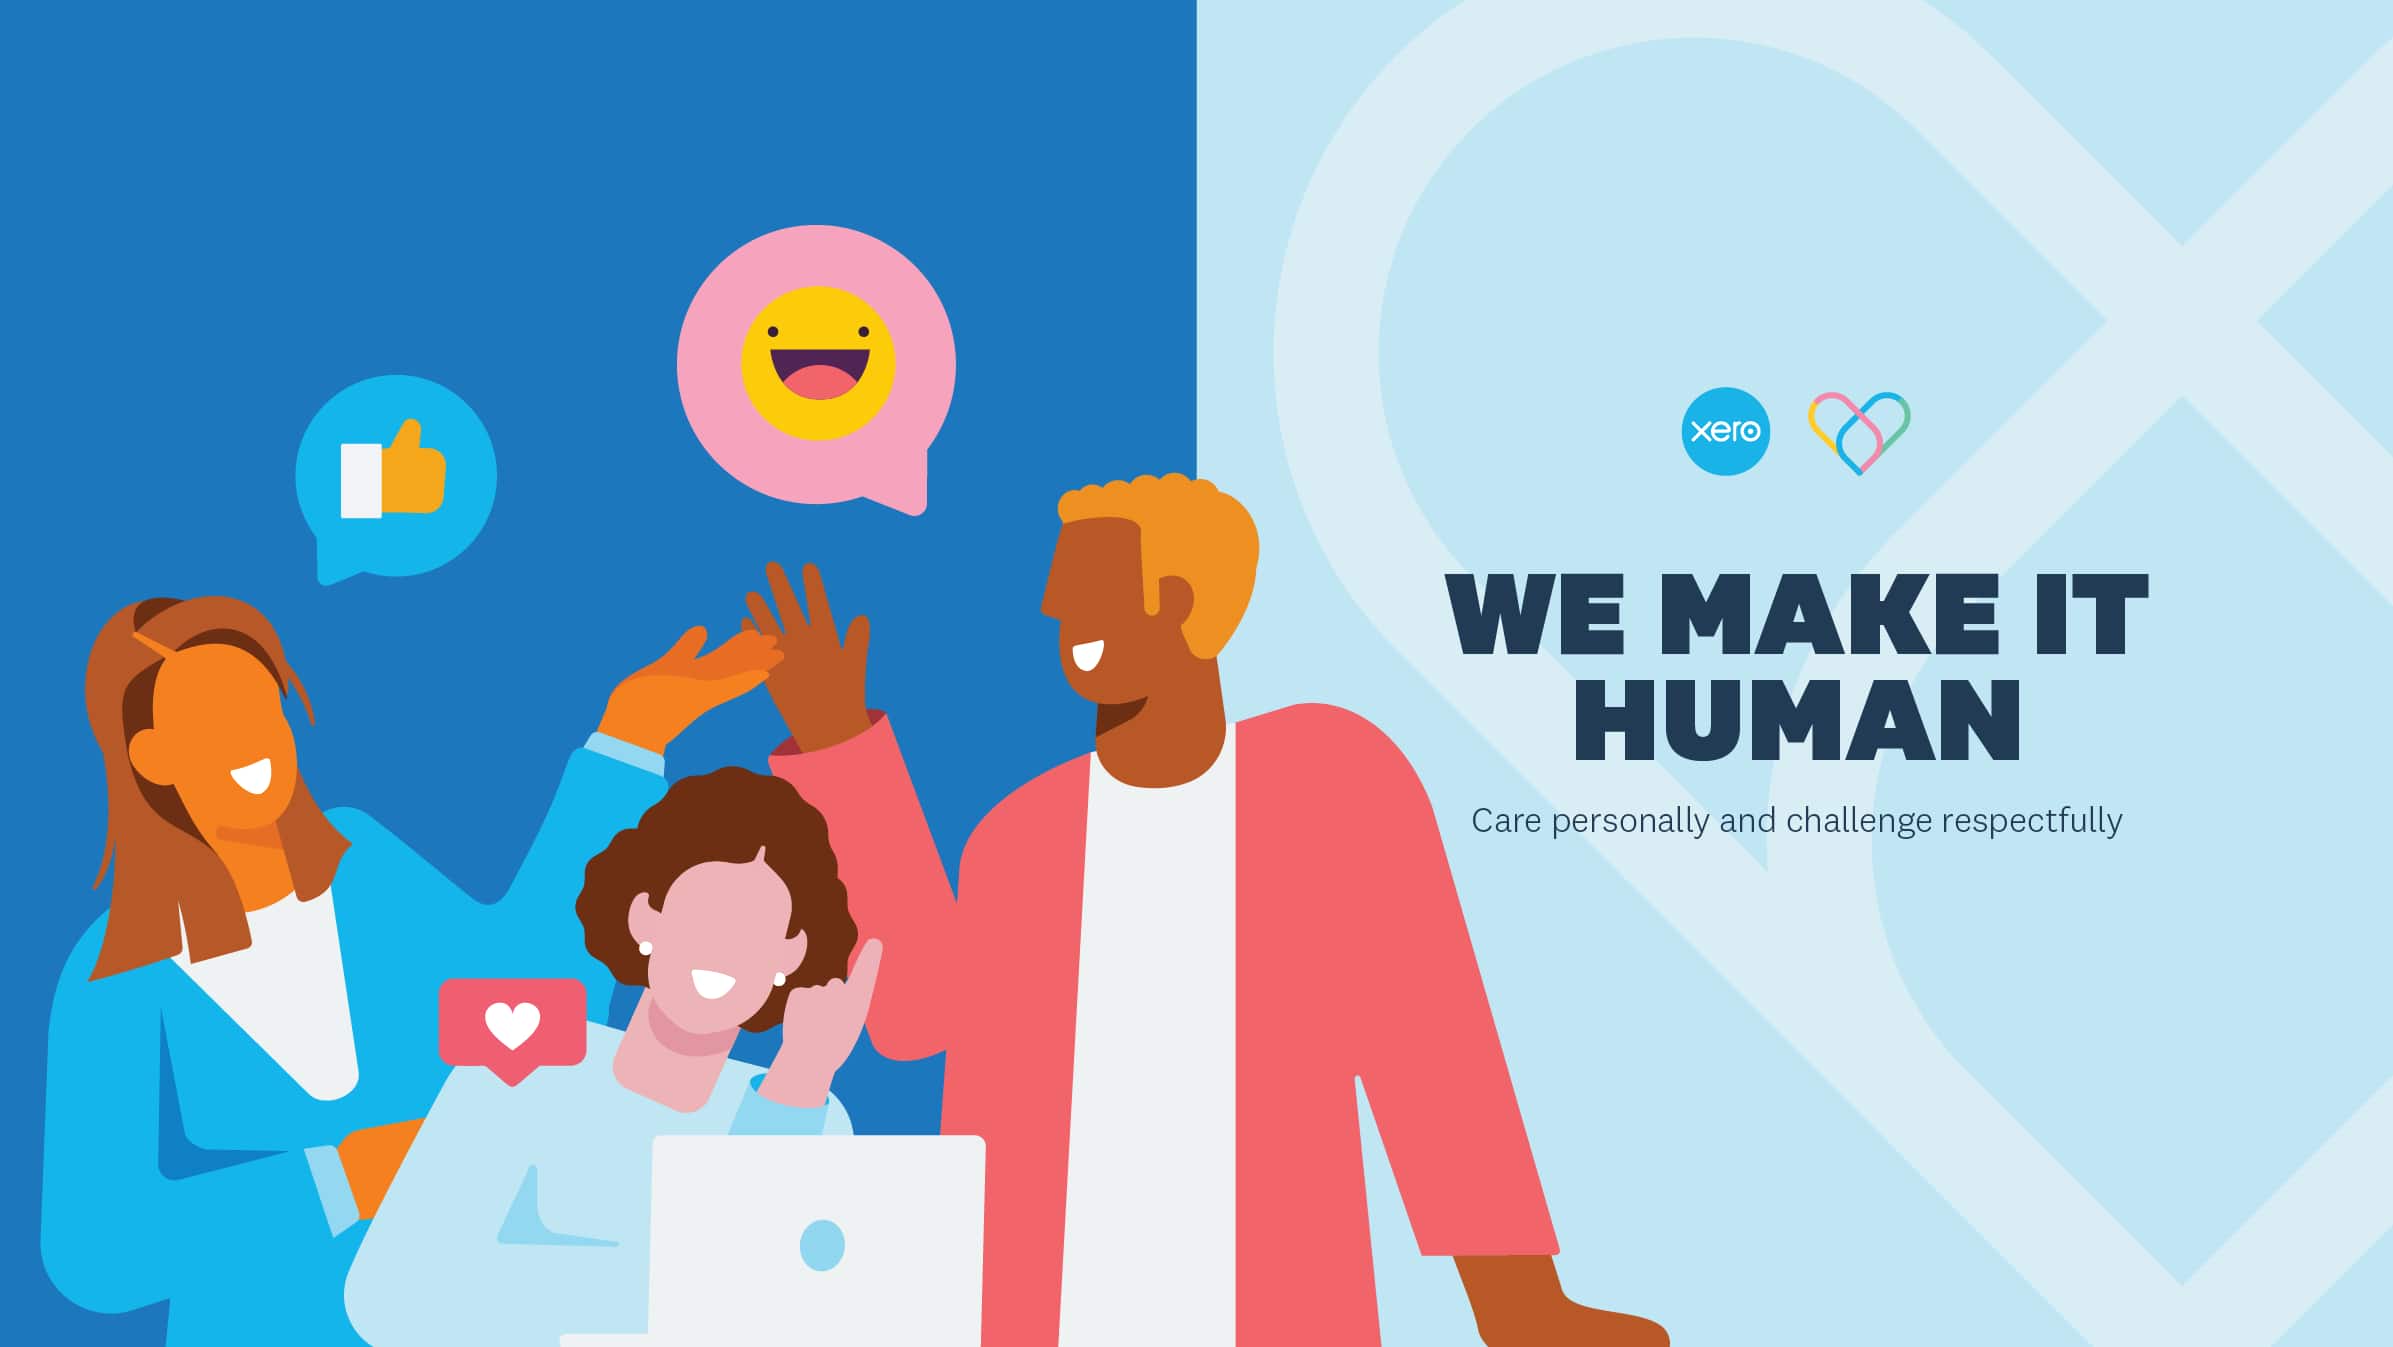 The Xero values icon for we make it human.